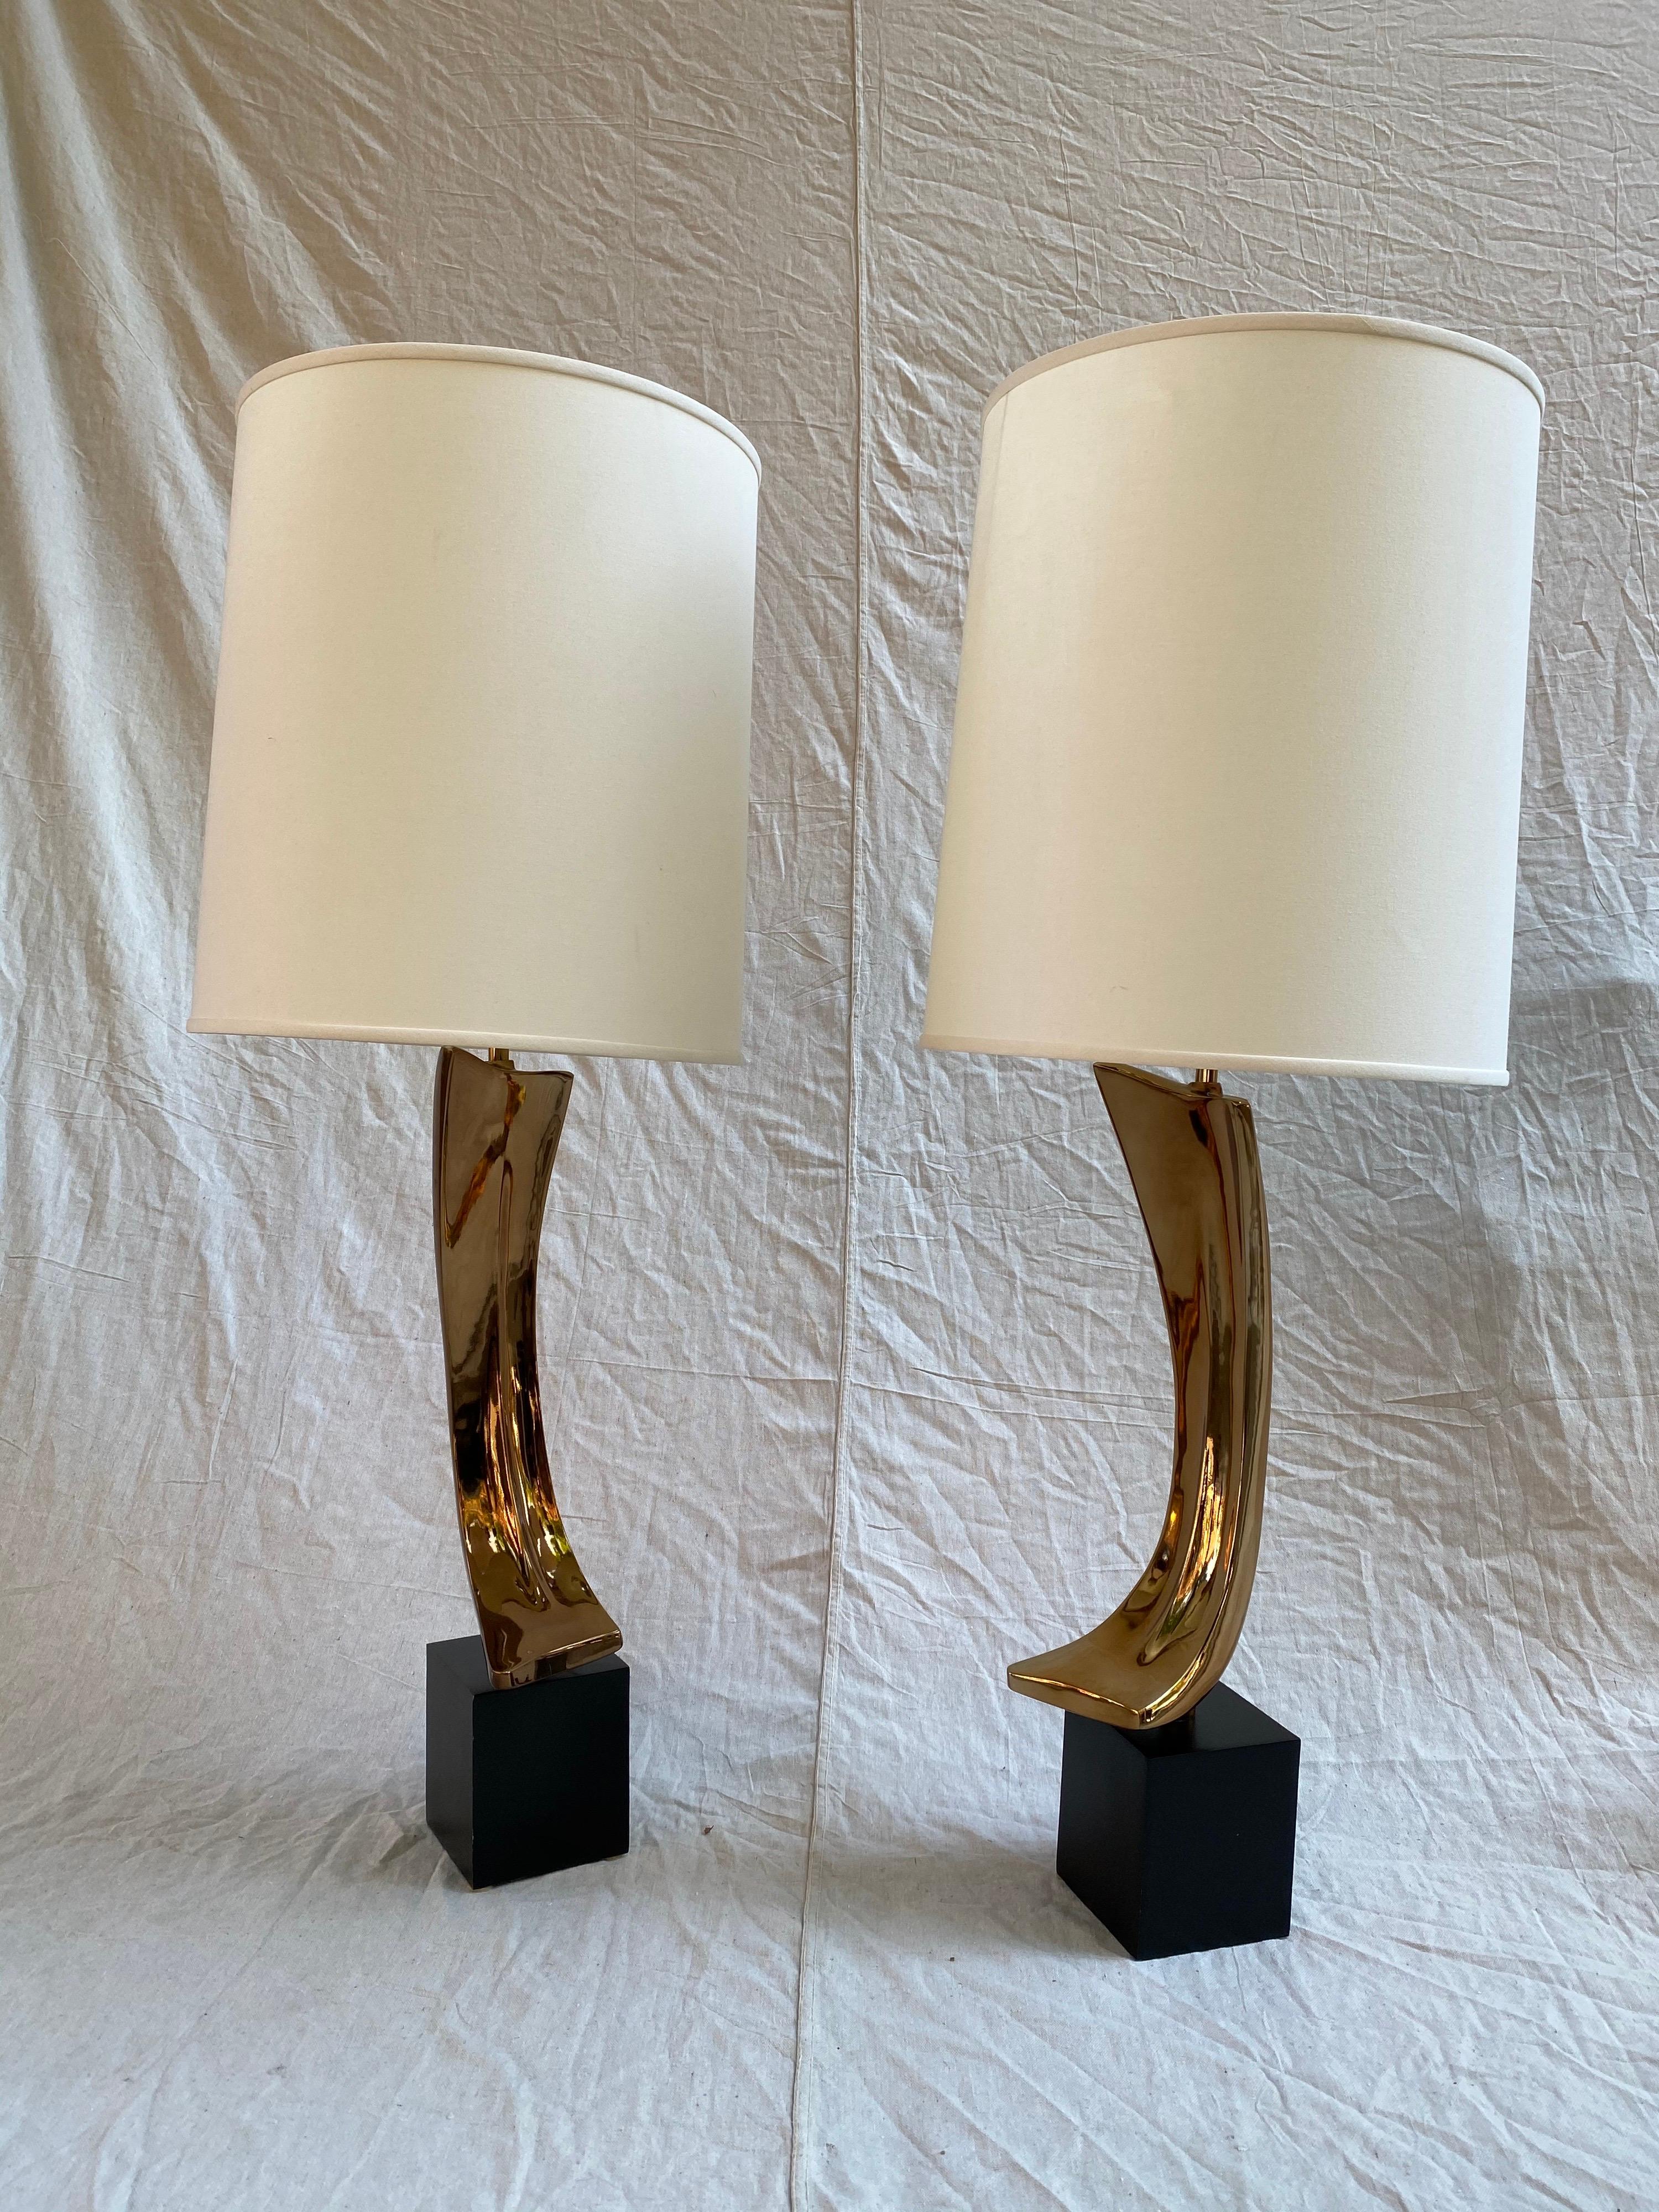 Pair of sculptural table lamps by Laurel Lamp Company. 1970s brass-plated abstract giant brush strokes. Brass bodies sit on black square bases. Lamps measure 24